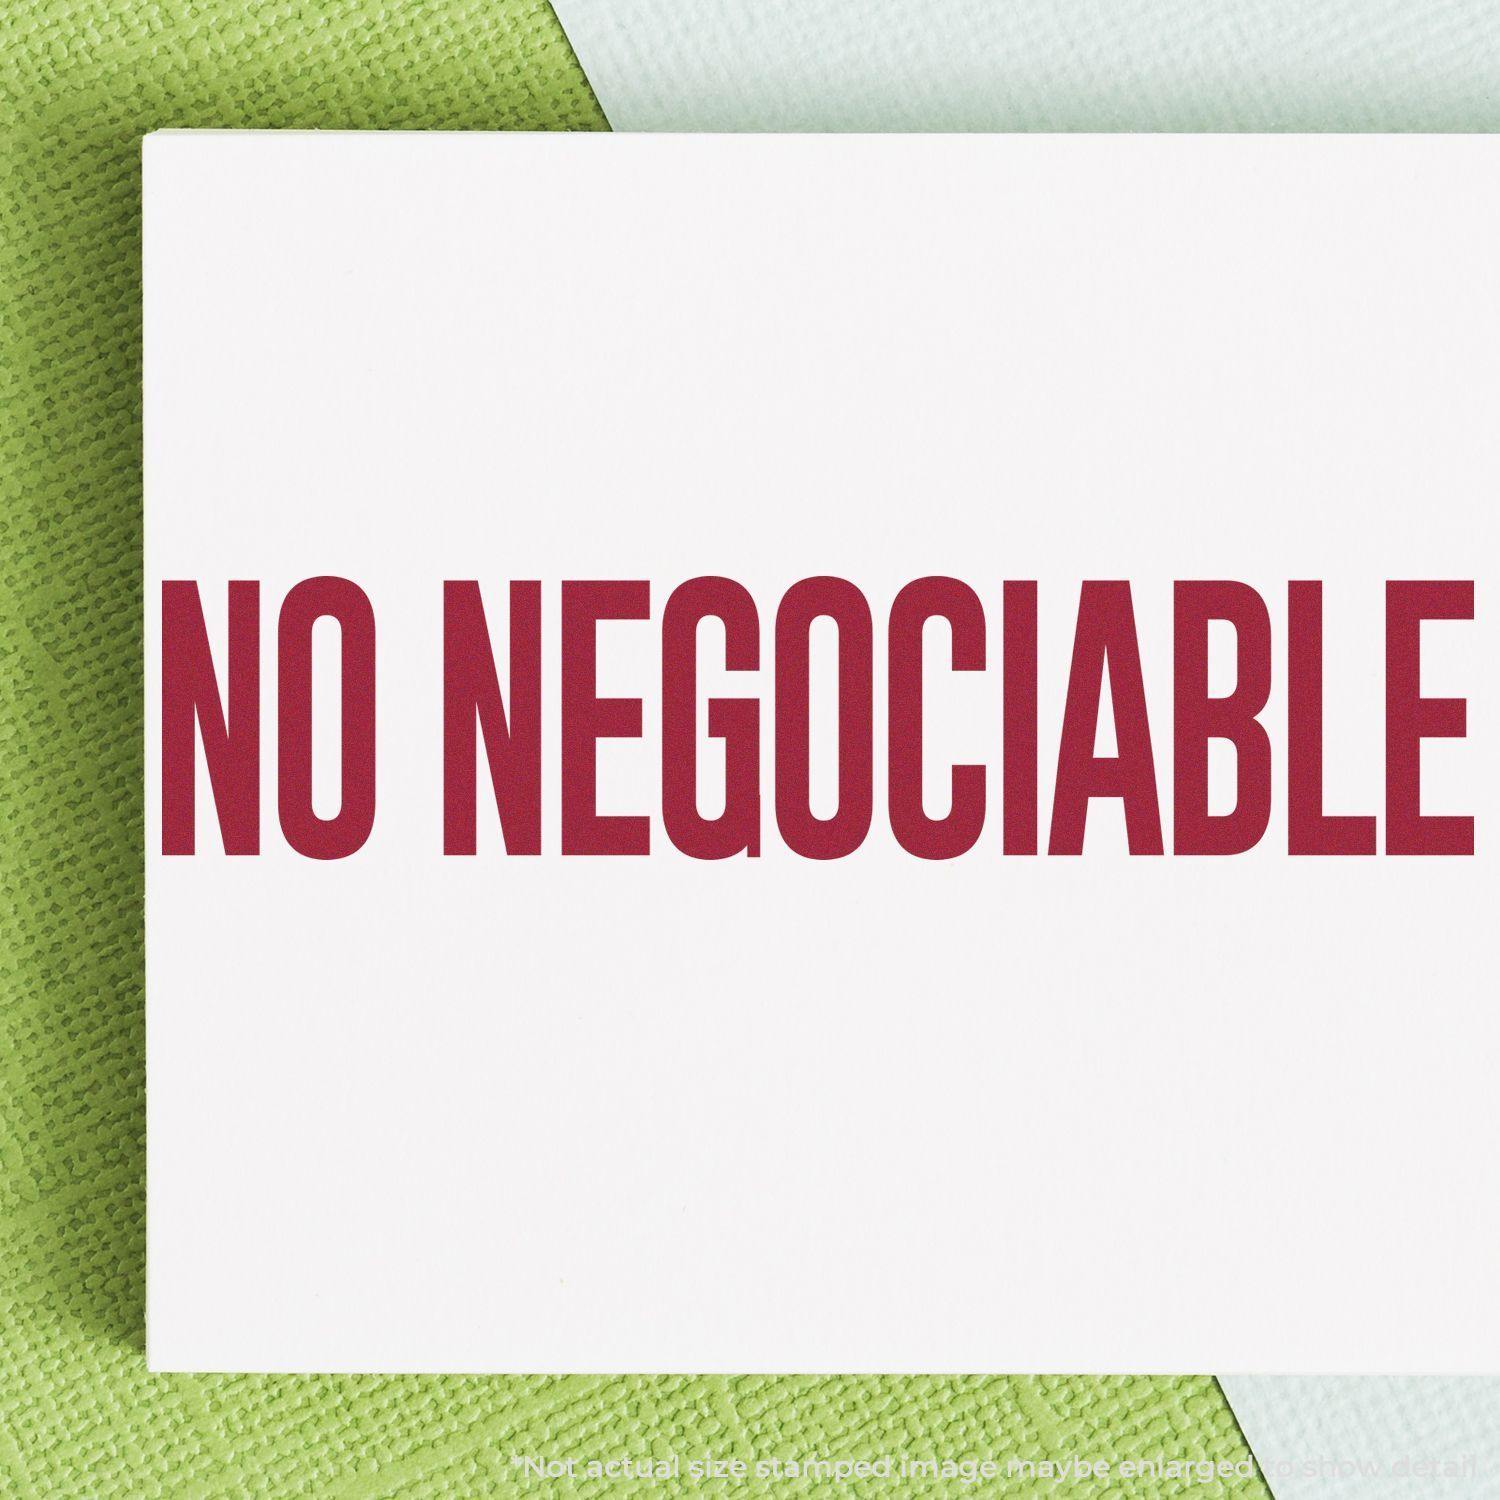 A stock office rubber stamp with a stamped image showing how the text "NO NEGOCIABLE" in a large font is displayed after stamping.